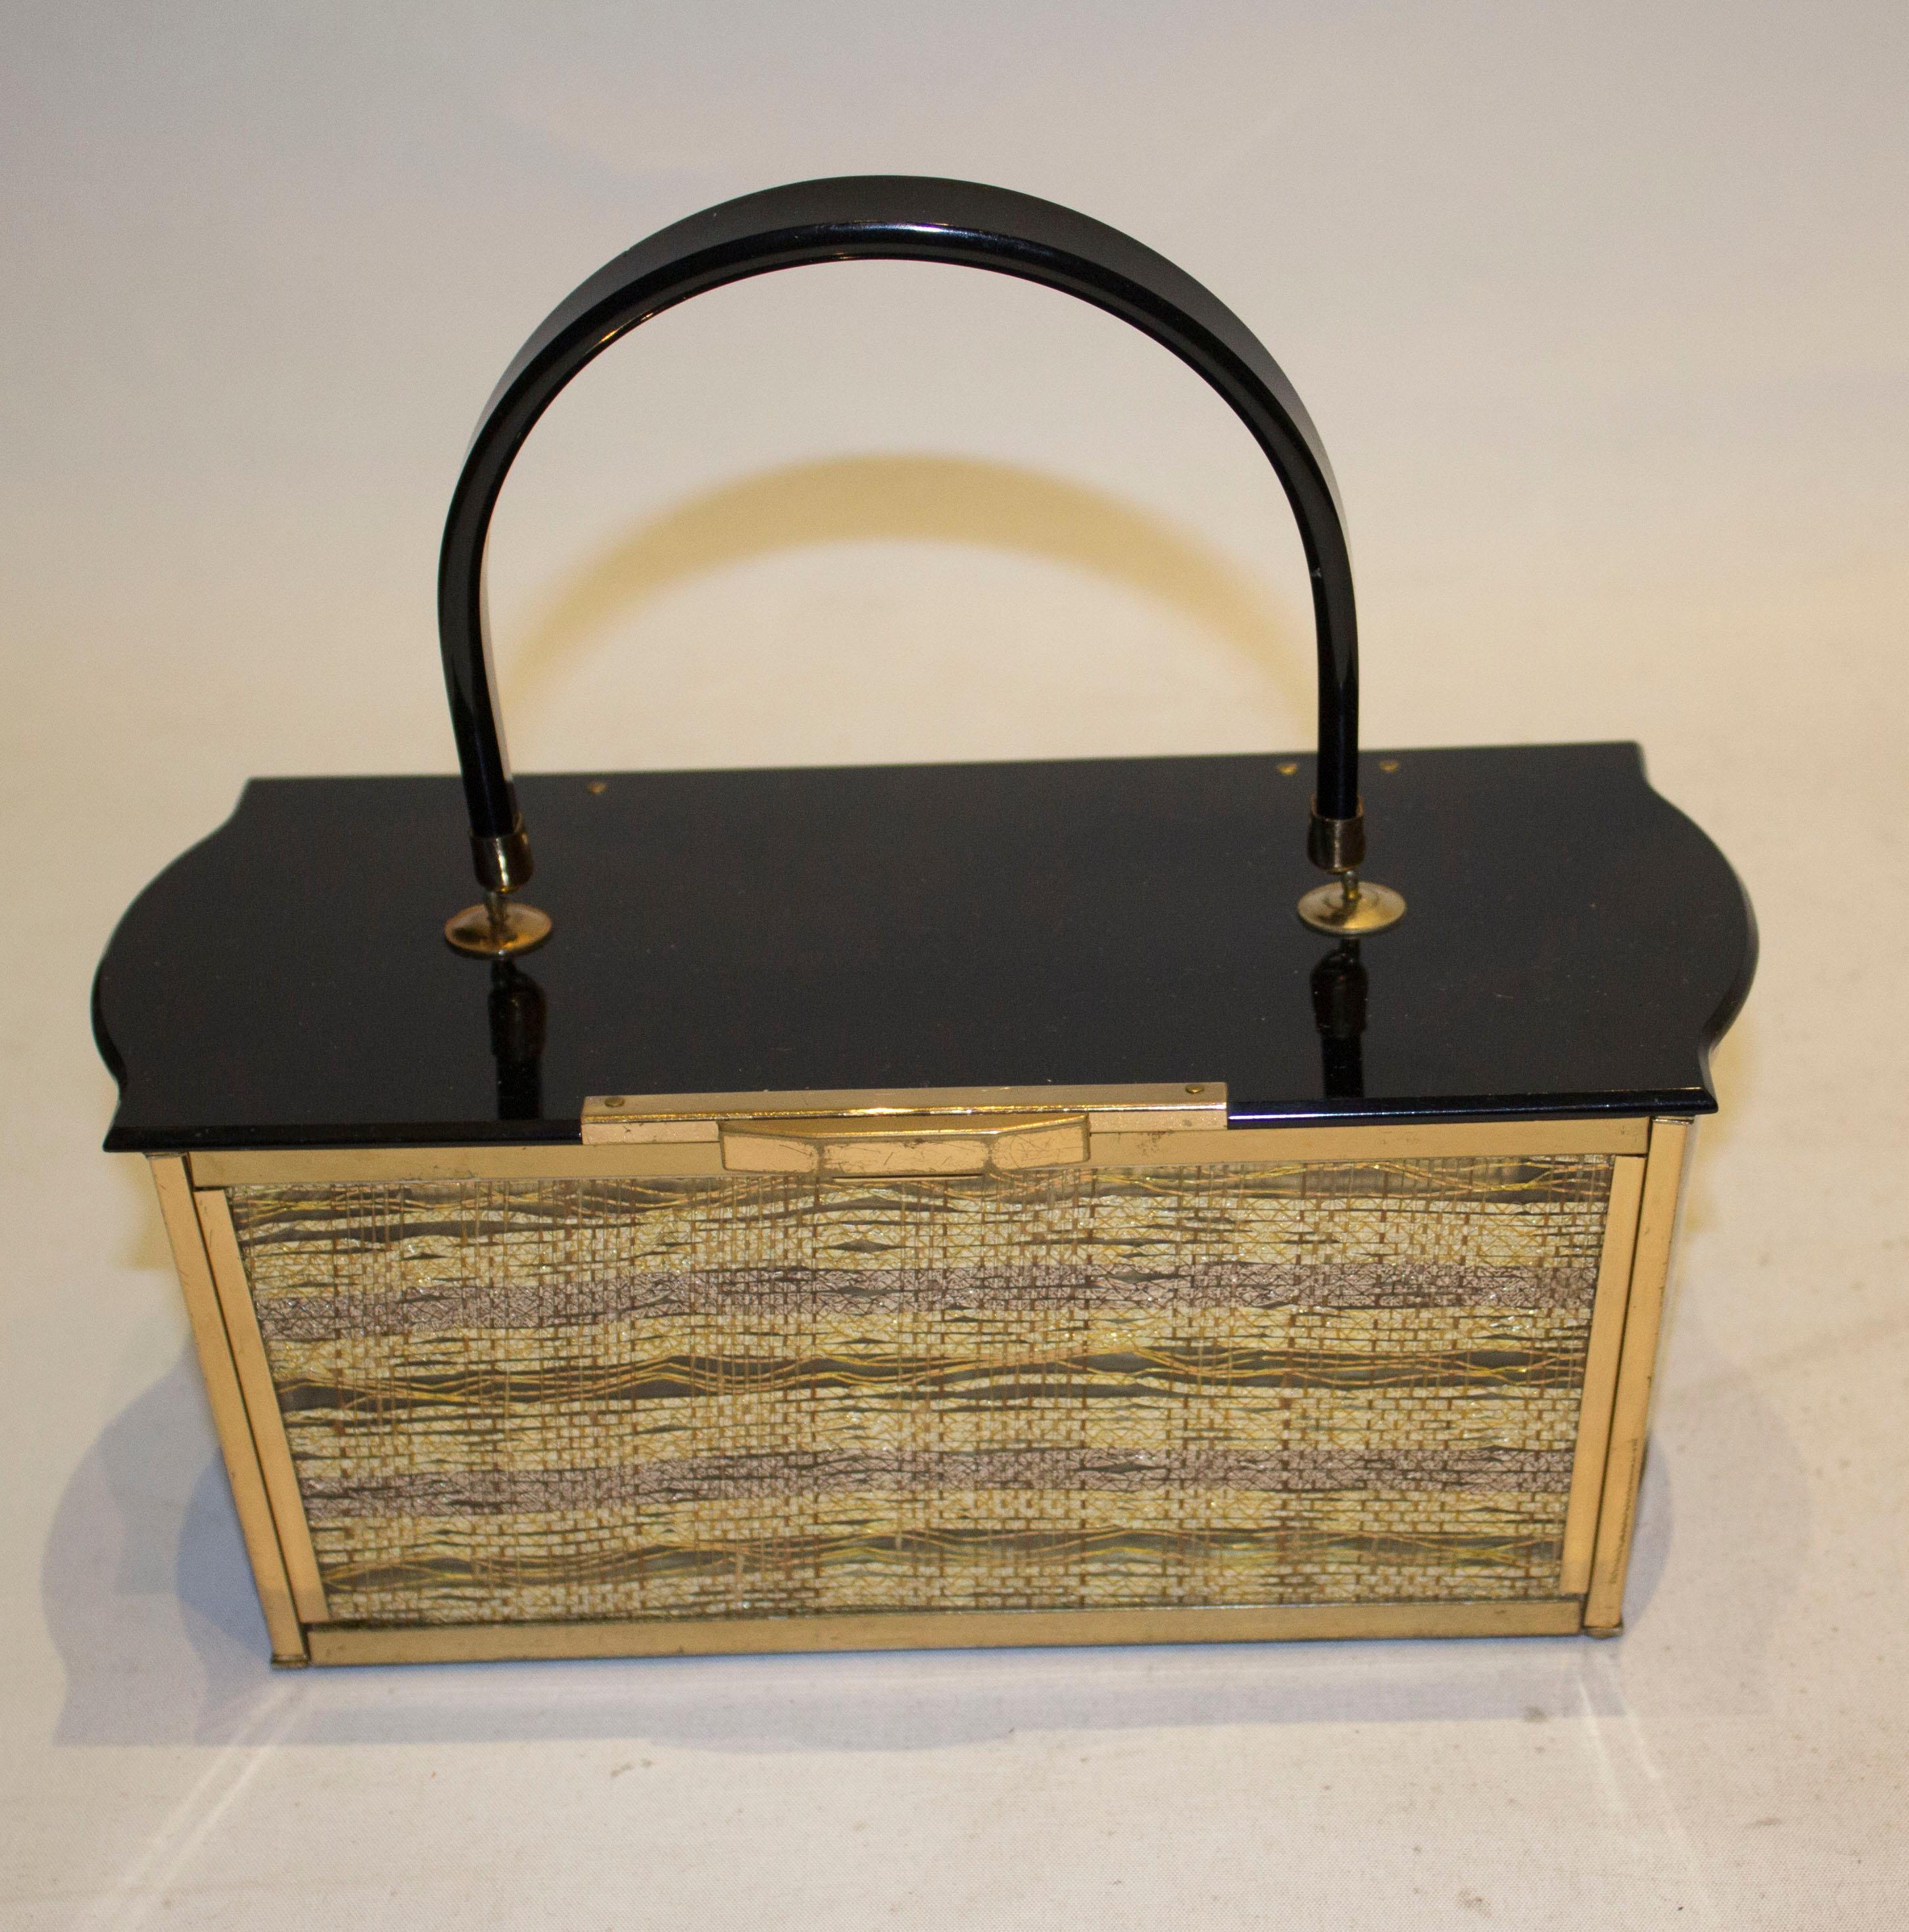 A chic black and gold lucite evening bag with top handle. The bag has a black lid with woven gold and bronze sides. width 10'', depth 5'' , height 4''.